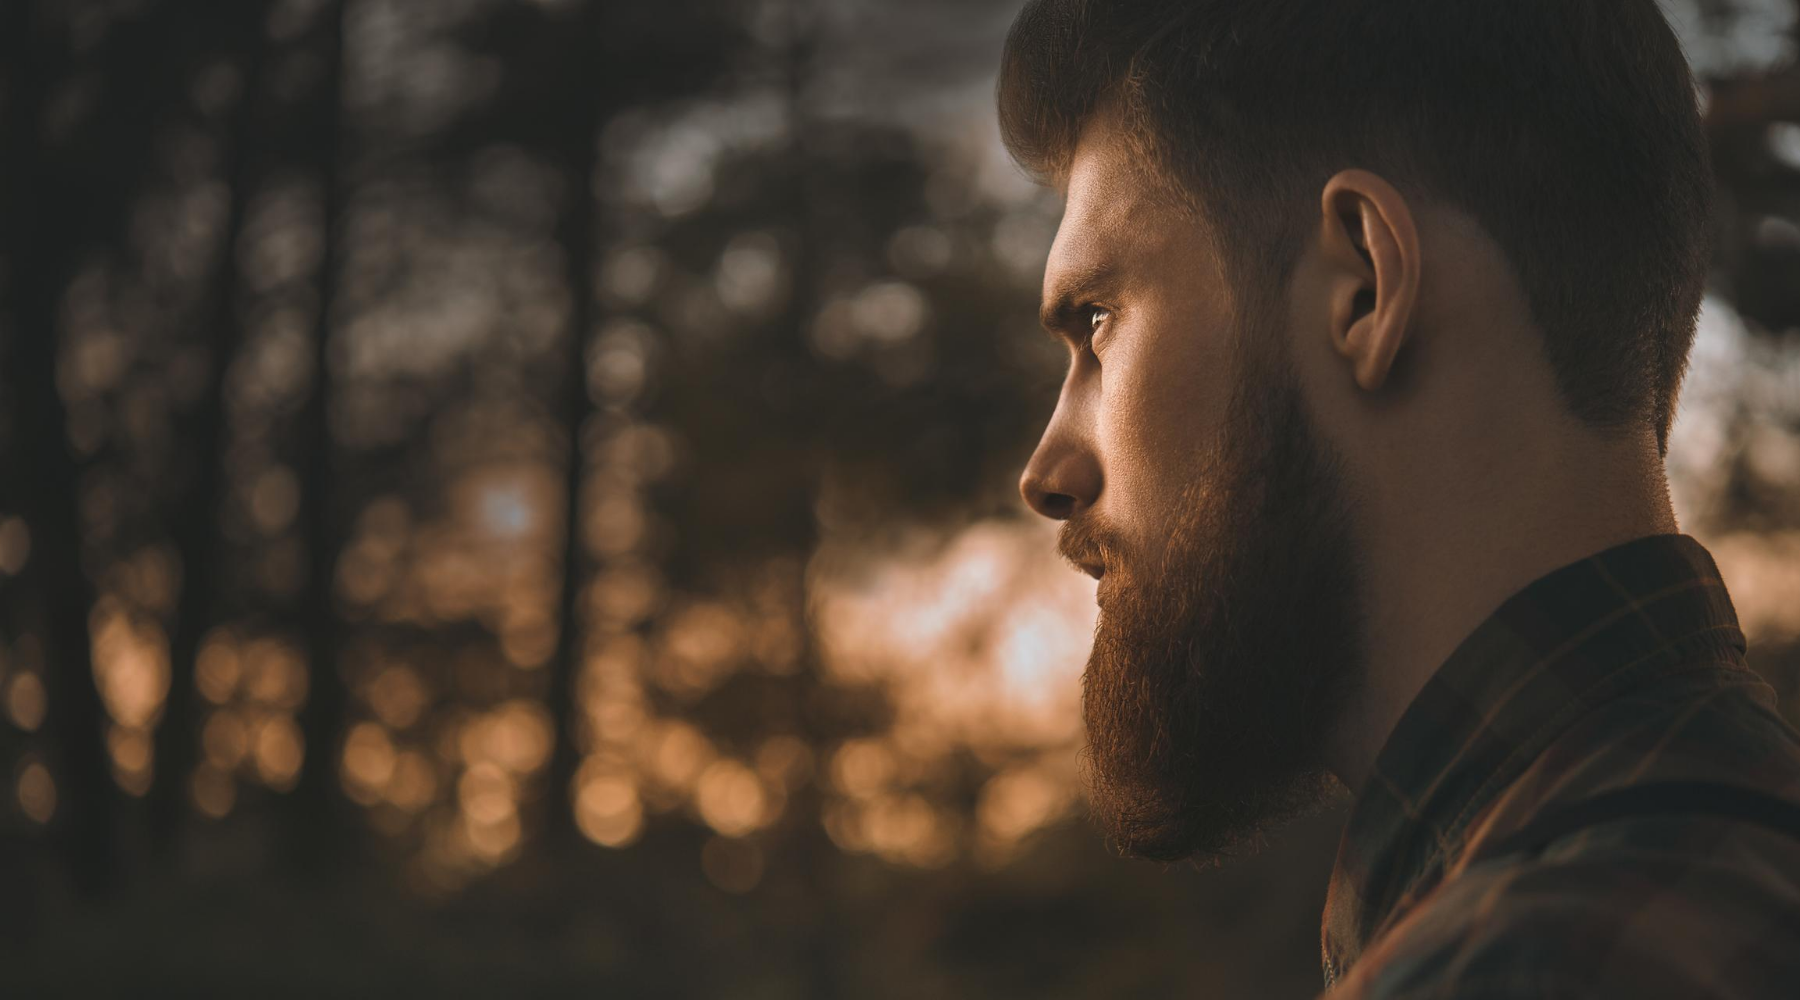 All you need to know about beard care. From how to grow a thicker beard to getting the best beard oil or beard trimmer for your buck, we've got a few ideas to help you get the most out of your facial hair.